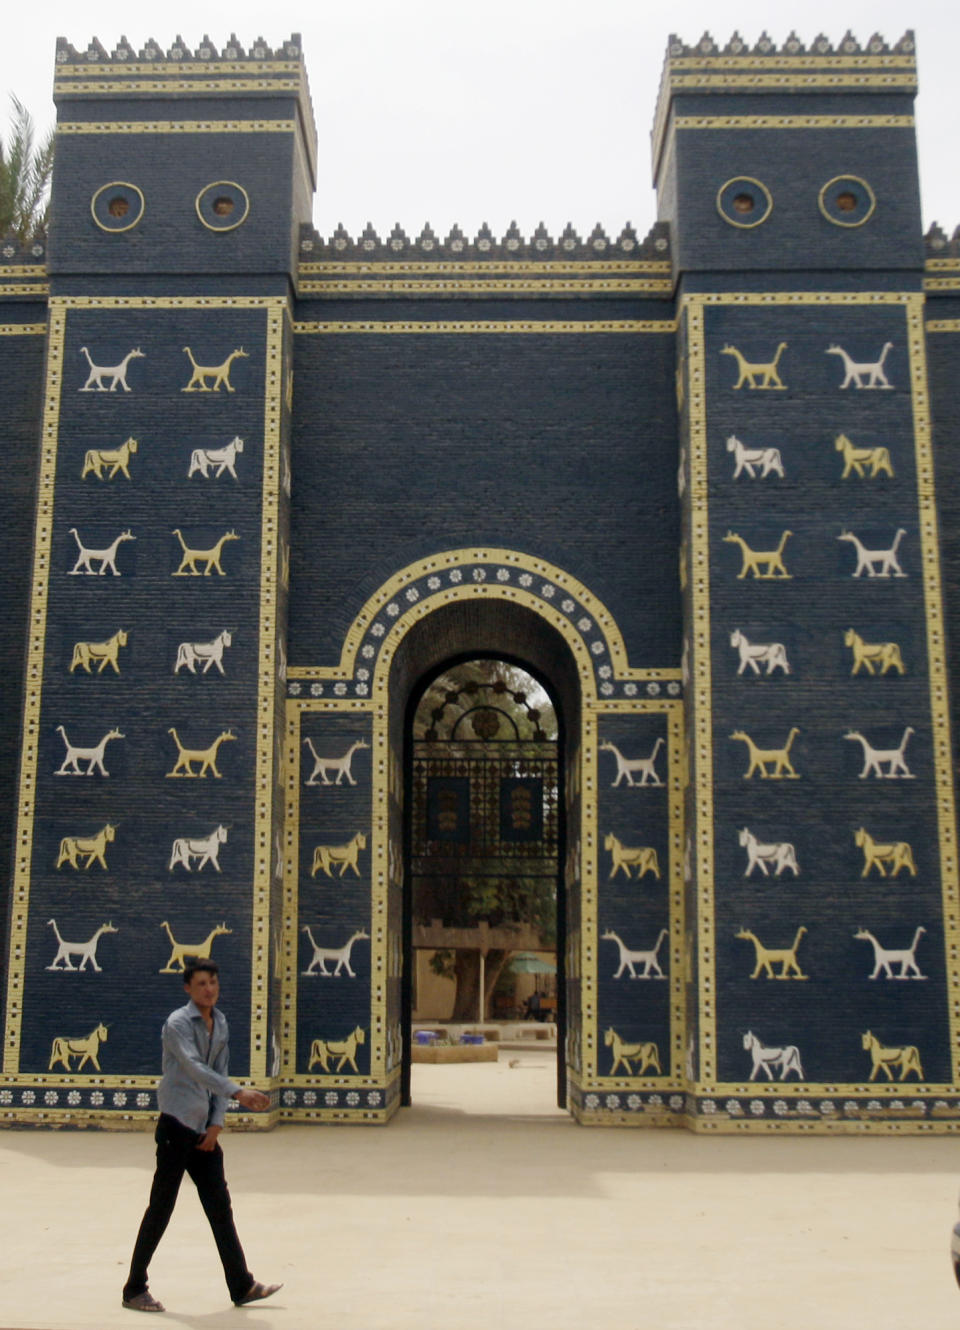 FILE - In this Sunday, May 6, 2012 file photo, a man walks in front of Ishtar Gate at the archaeological site of Babylon, Iraq. Iraq is celebrating UNESCO's World Heritage Committee's naming the historic city of Babylon a World Heritage Site in a vote in Azerbaijan. Friday, July 5, 2019 vote comes after Iraq bid for years for Babylon to become a World Heritage Site. (AP Photo/Khalid Mohammed, File)